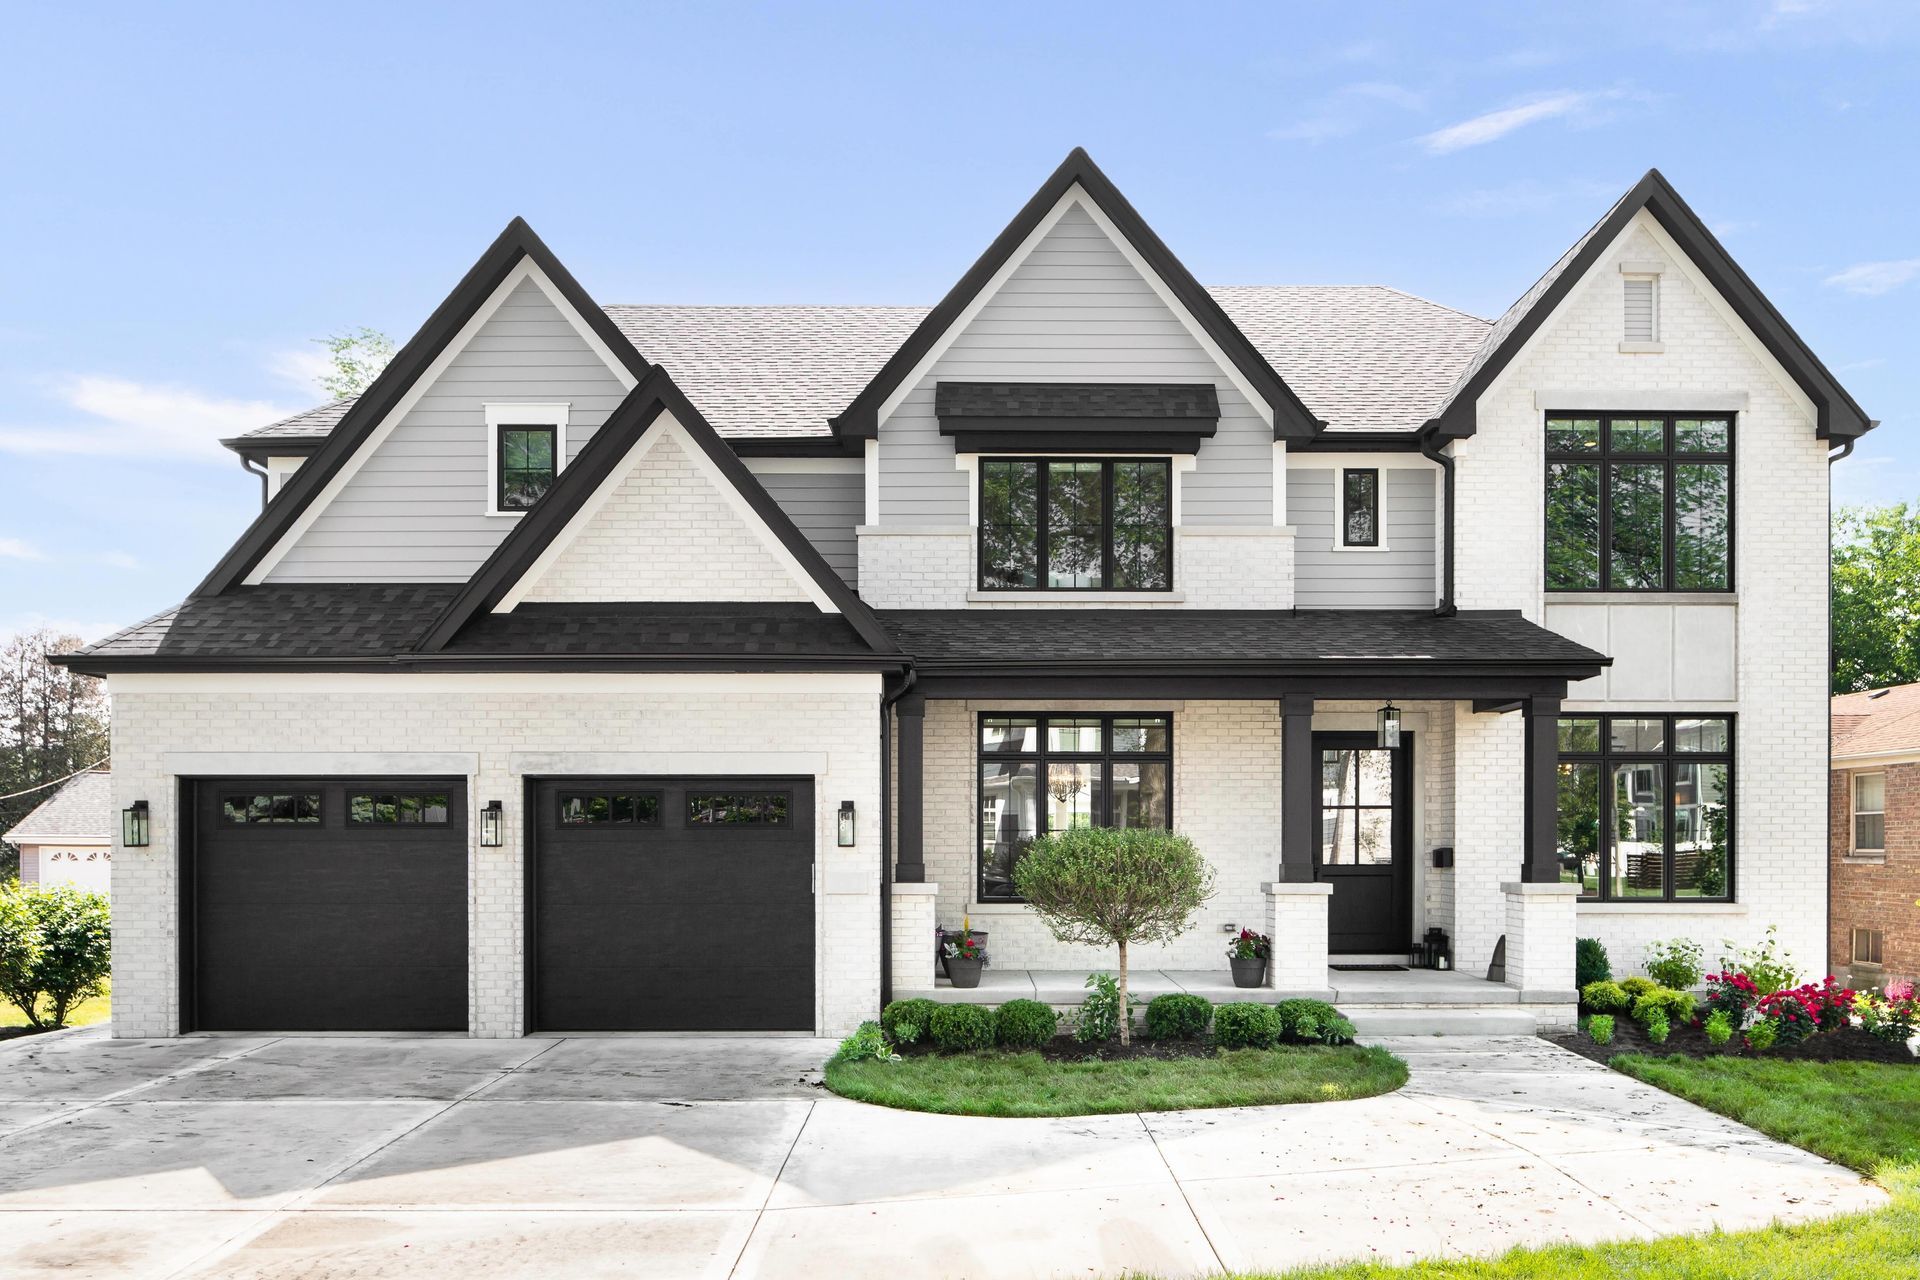 A large white house with black trim and black garage doors.